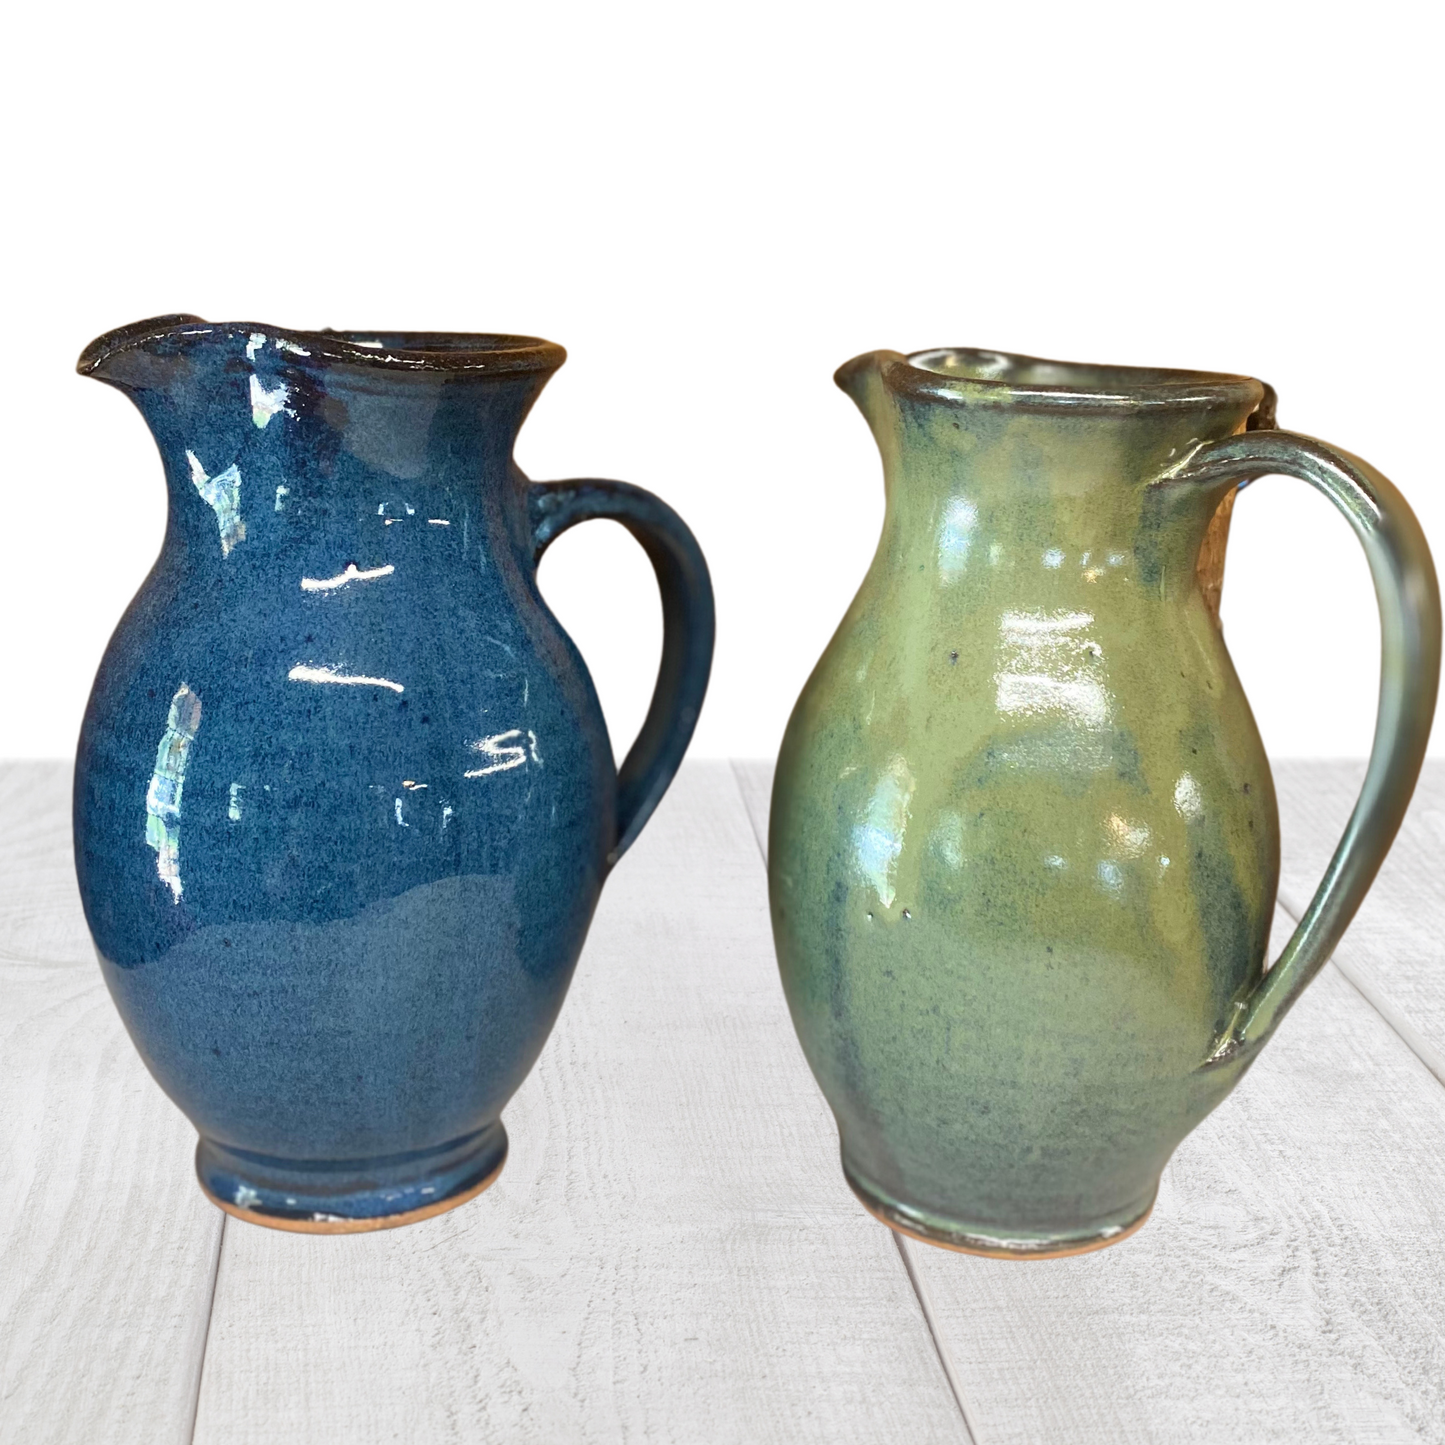 Water or Ice Tea Pitcher quart size  handmade pottery for coffee steep tea pour spout handle. Small to medium size